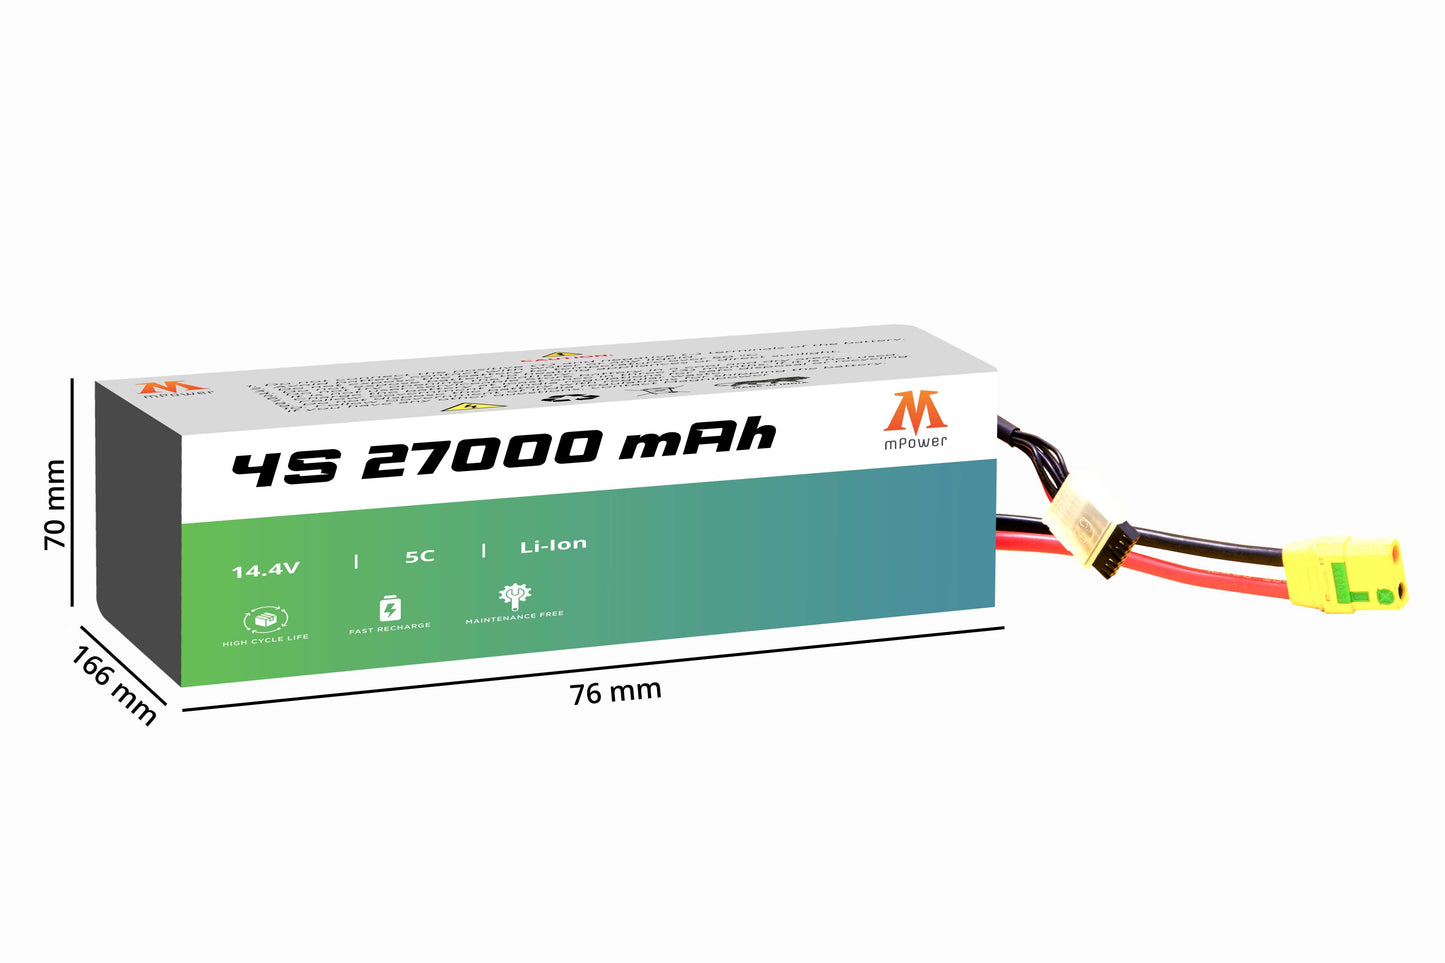 mPower 4S 27000mAh Lithium-Ion Battery for Survey Drones